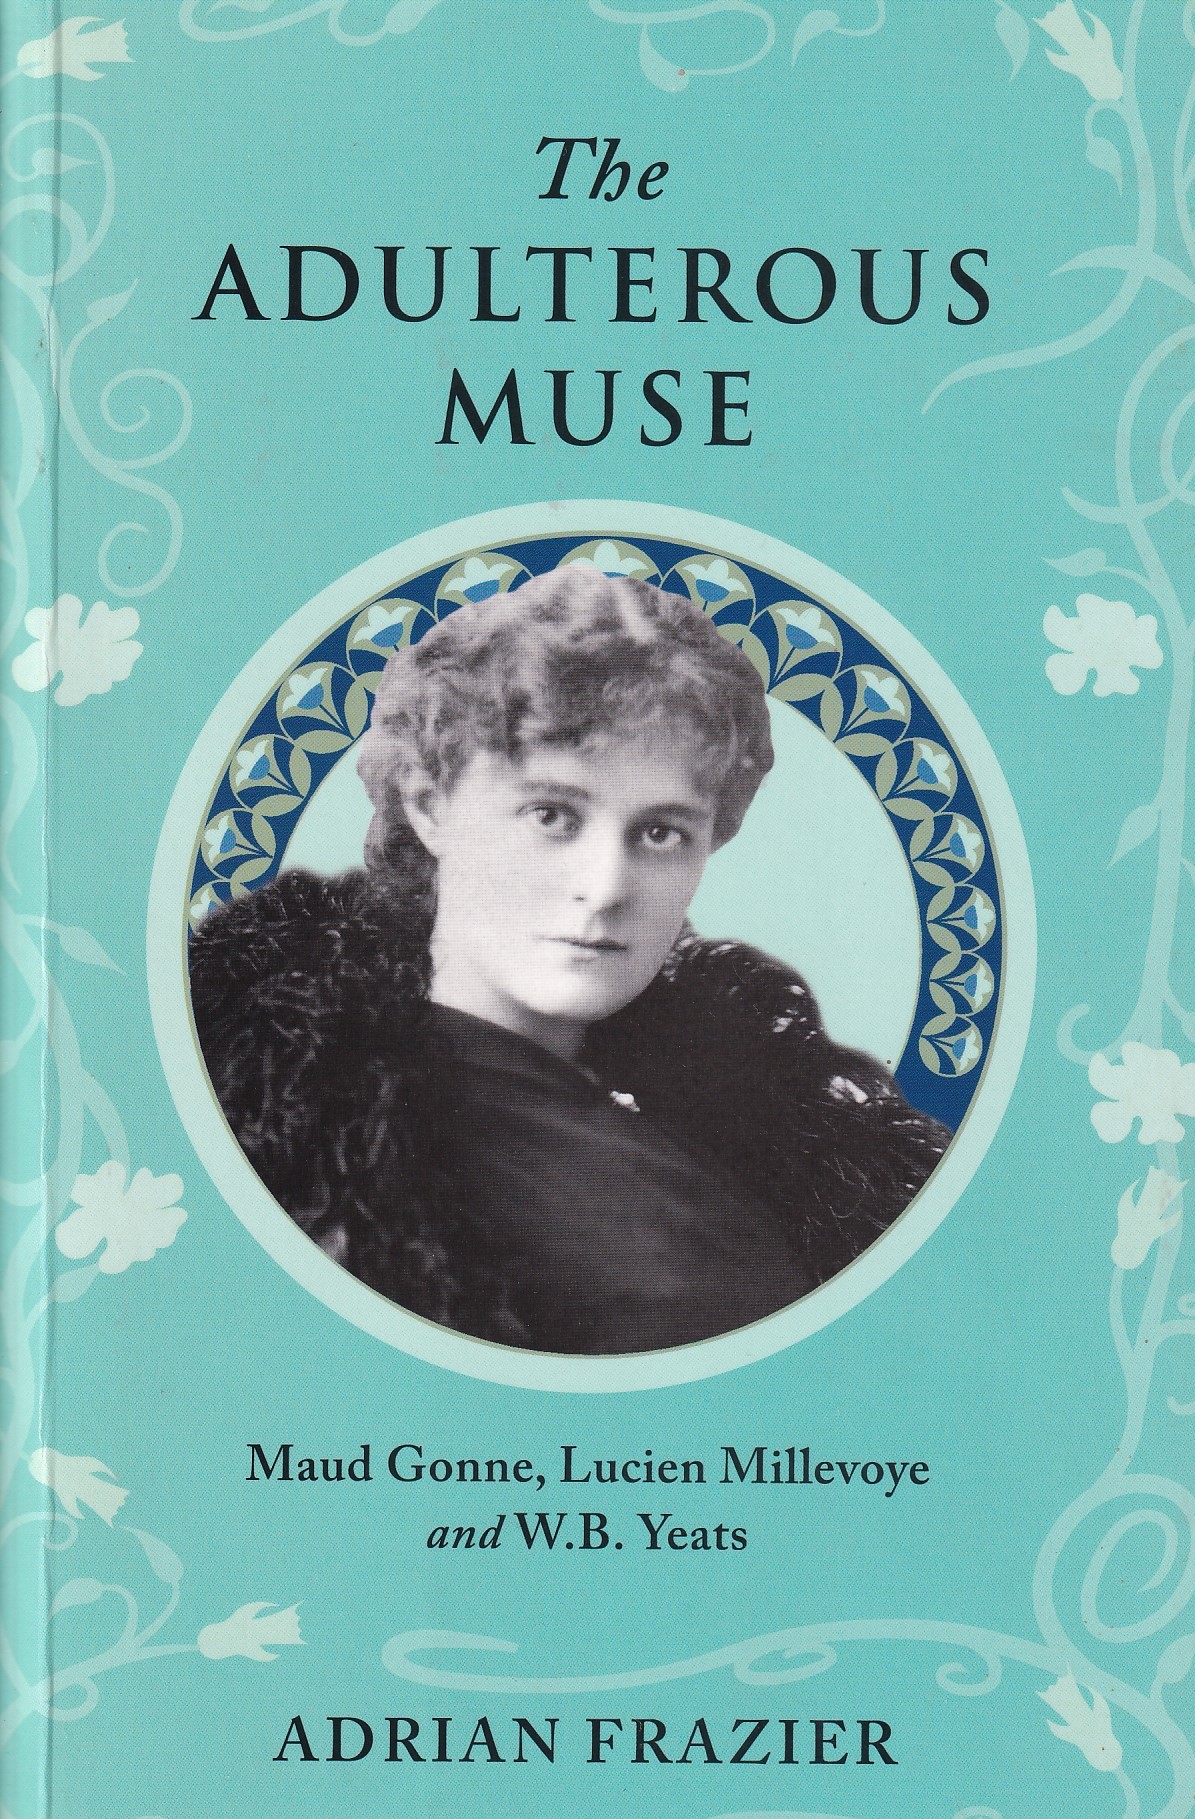 Adulterous Muse : Maude Gonne, Lucien Millevoye and W.B. Yeats [Signed] by Adrian Frazier